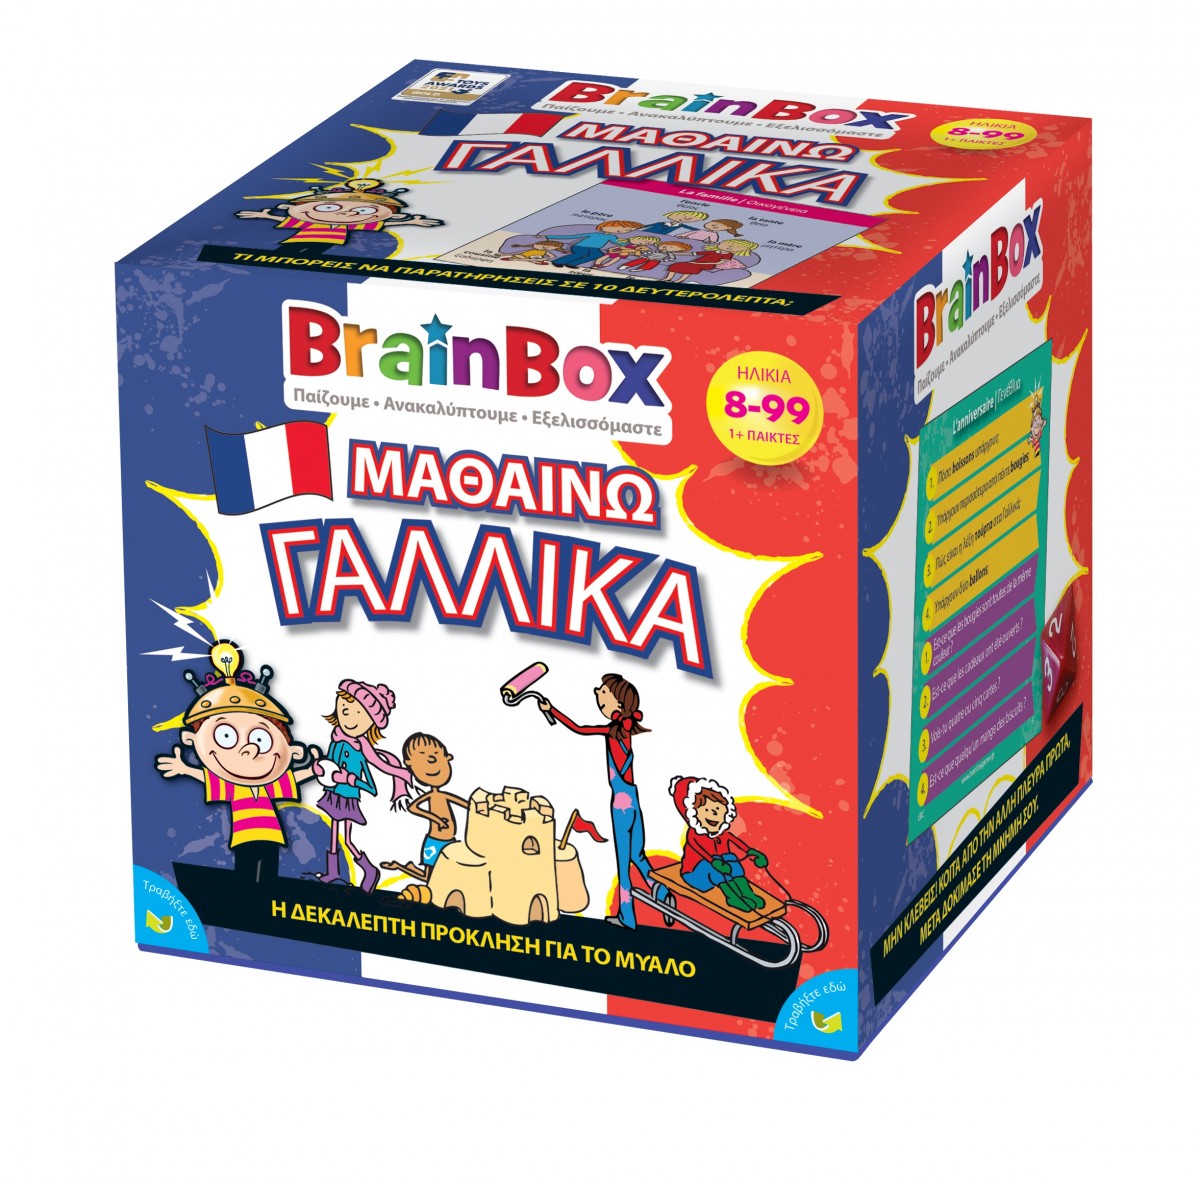 BRAINBOX BOARD GAME LEARNING FRENCH